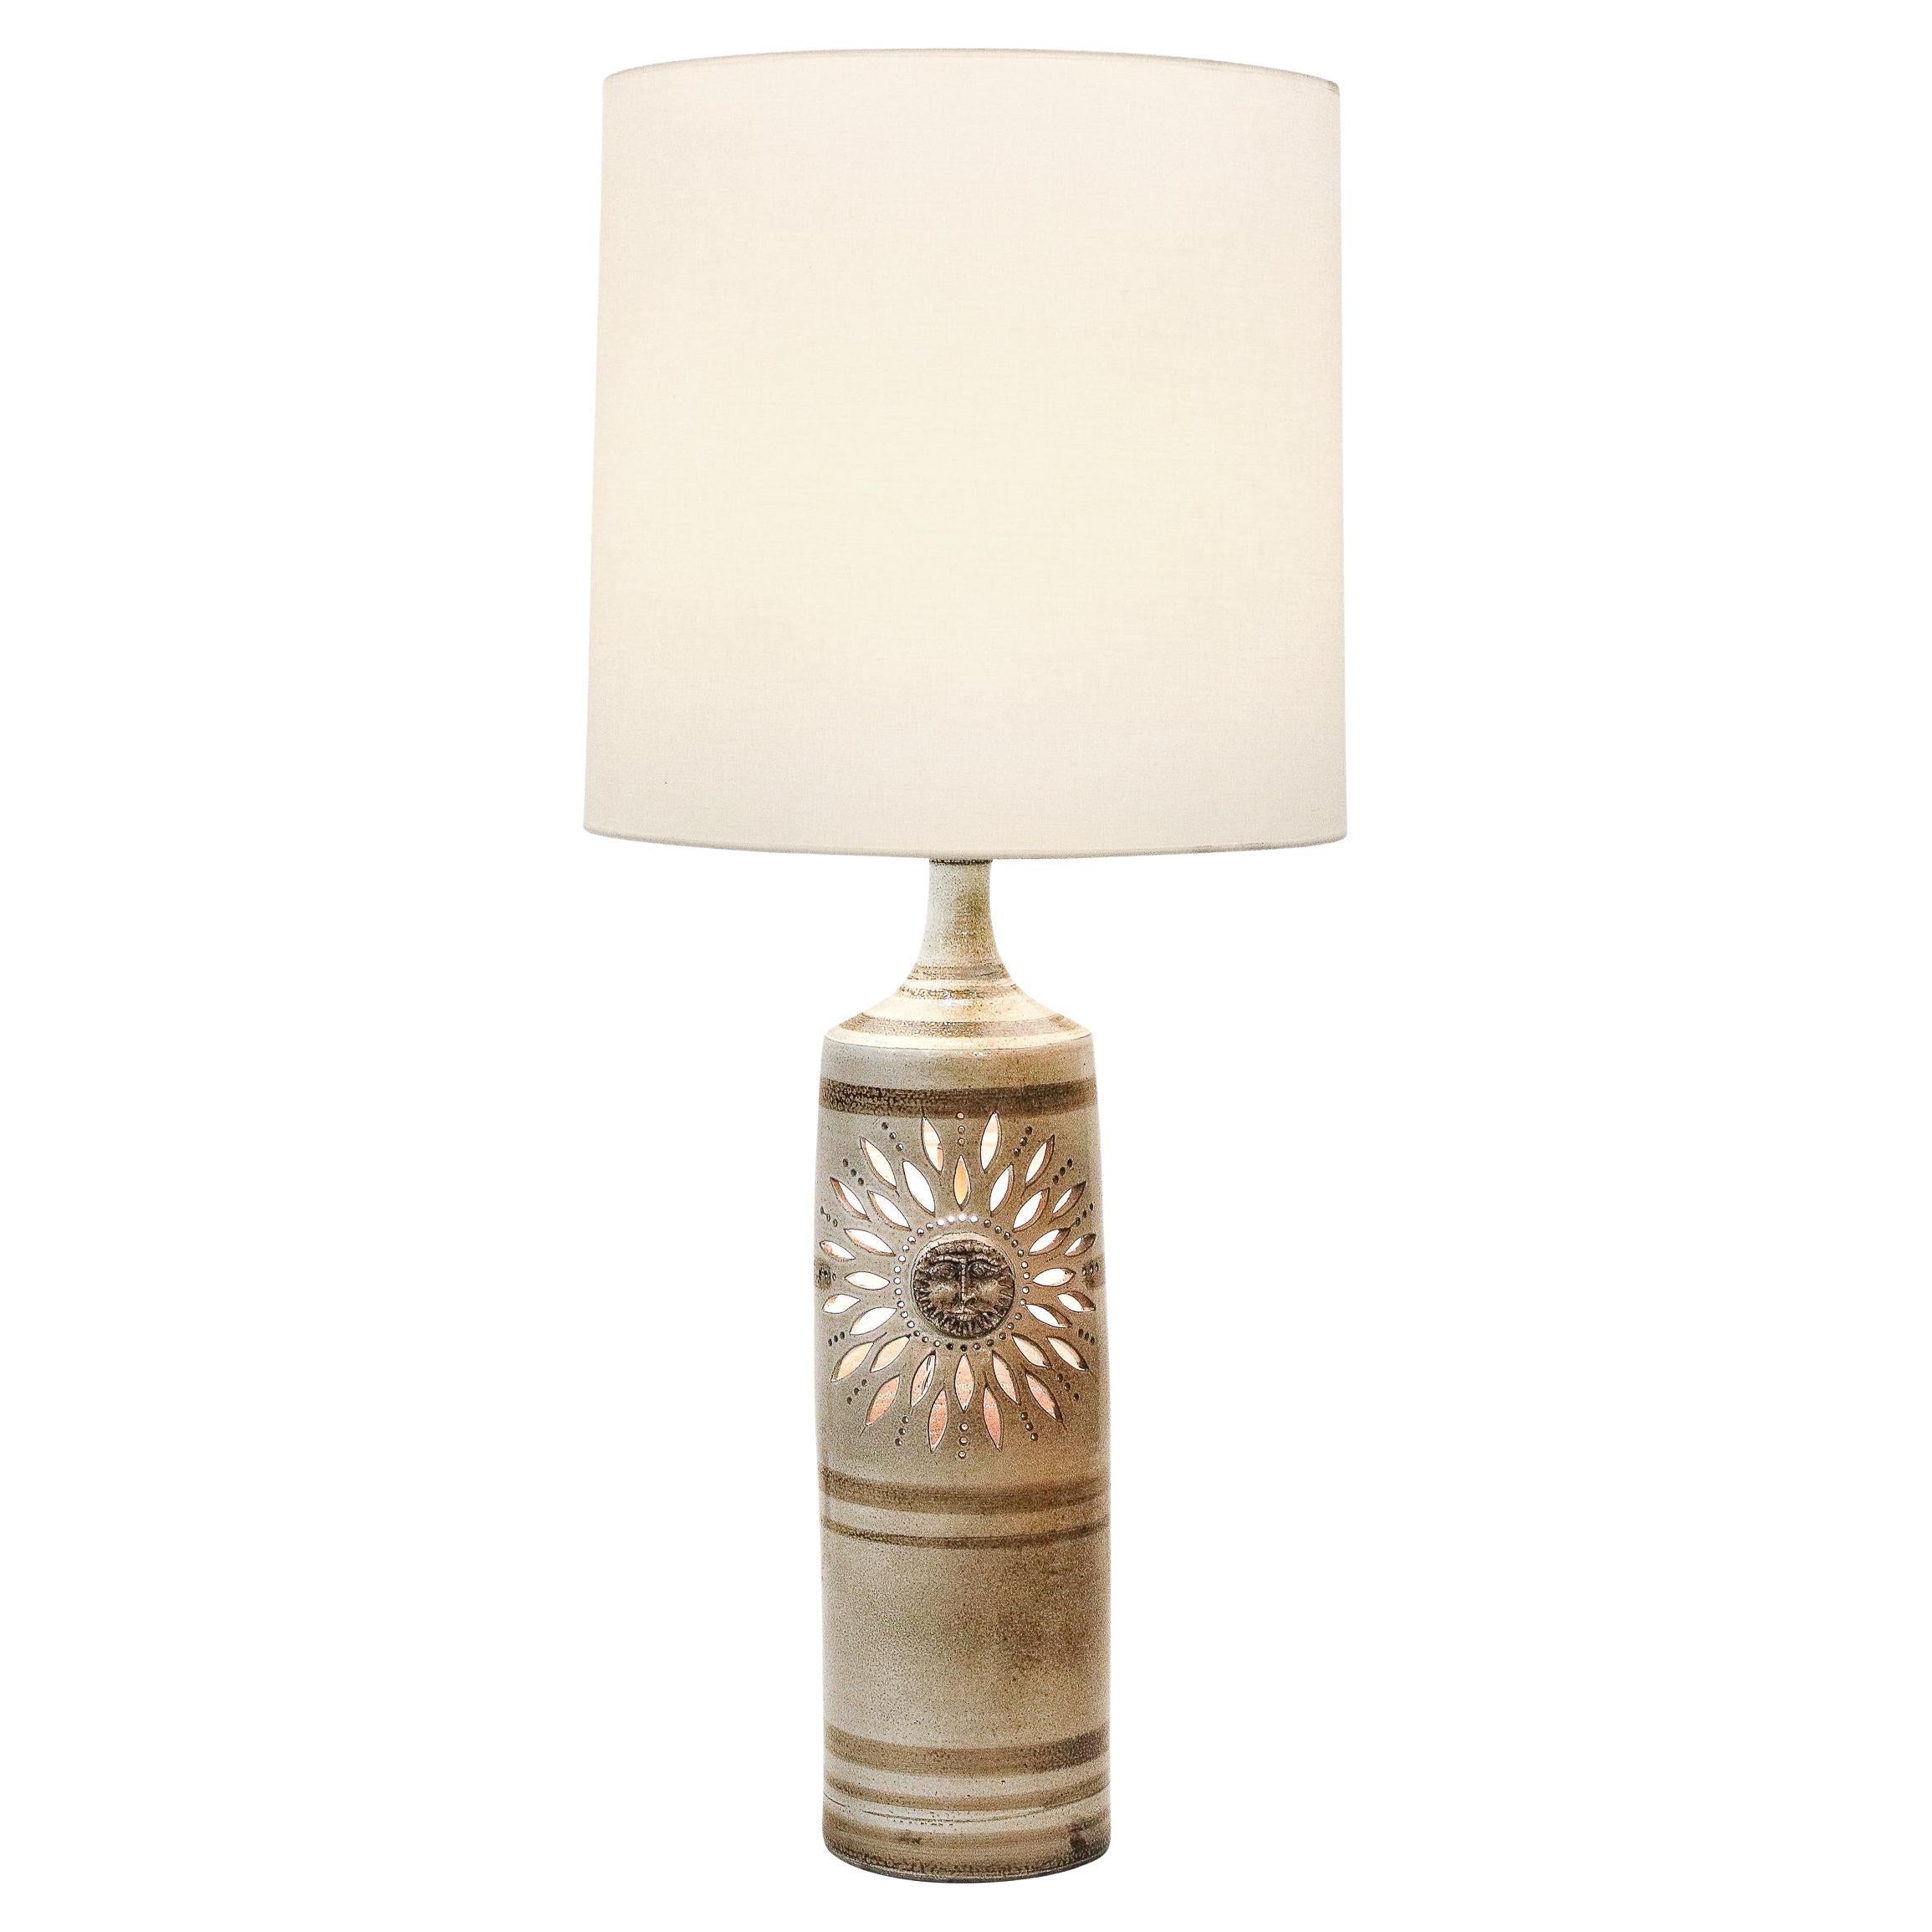 Midcentury Ceramic Hand Painted Floral Sun Motif Table Lamp by Pierre Pissareff For Sale